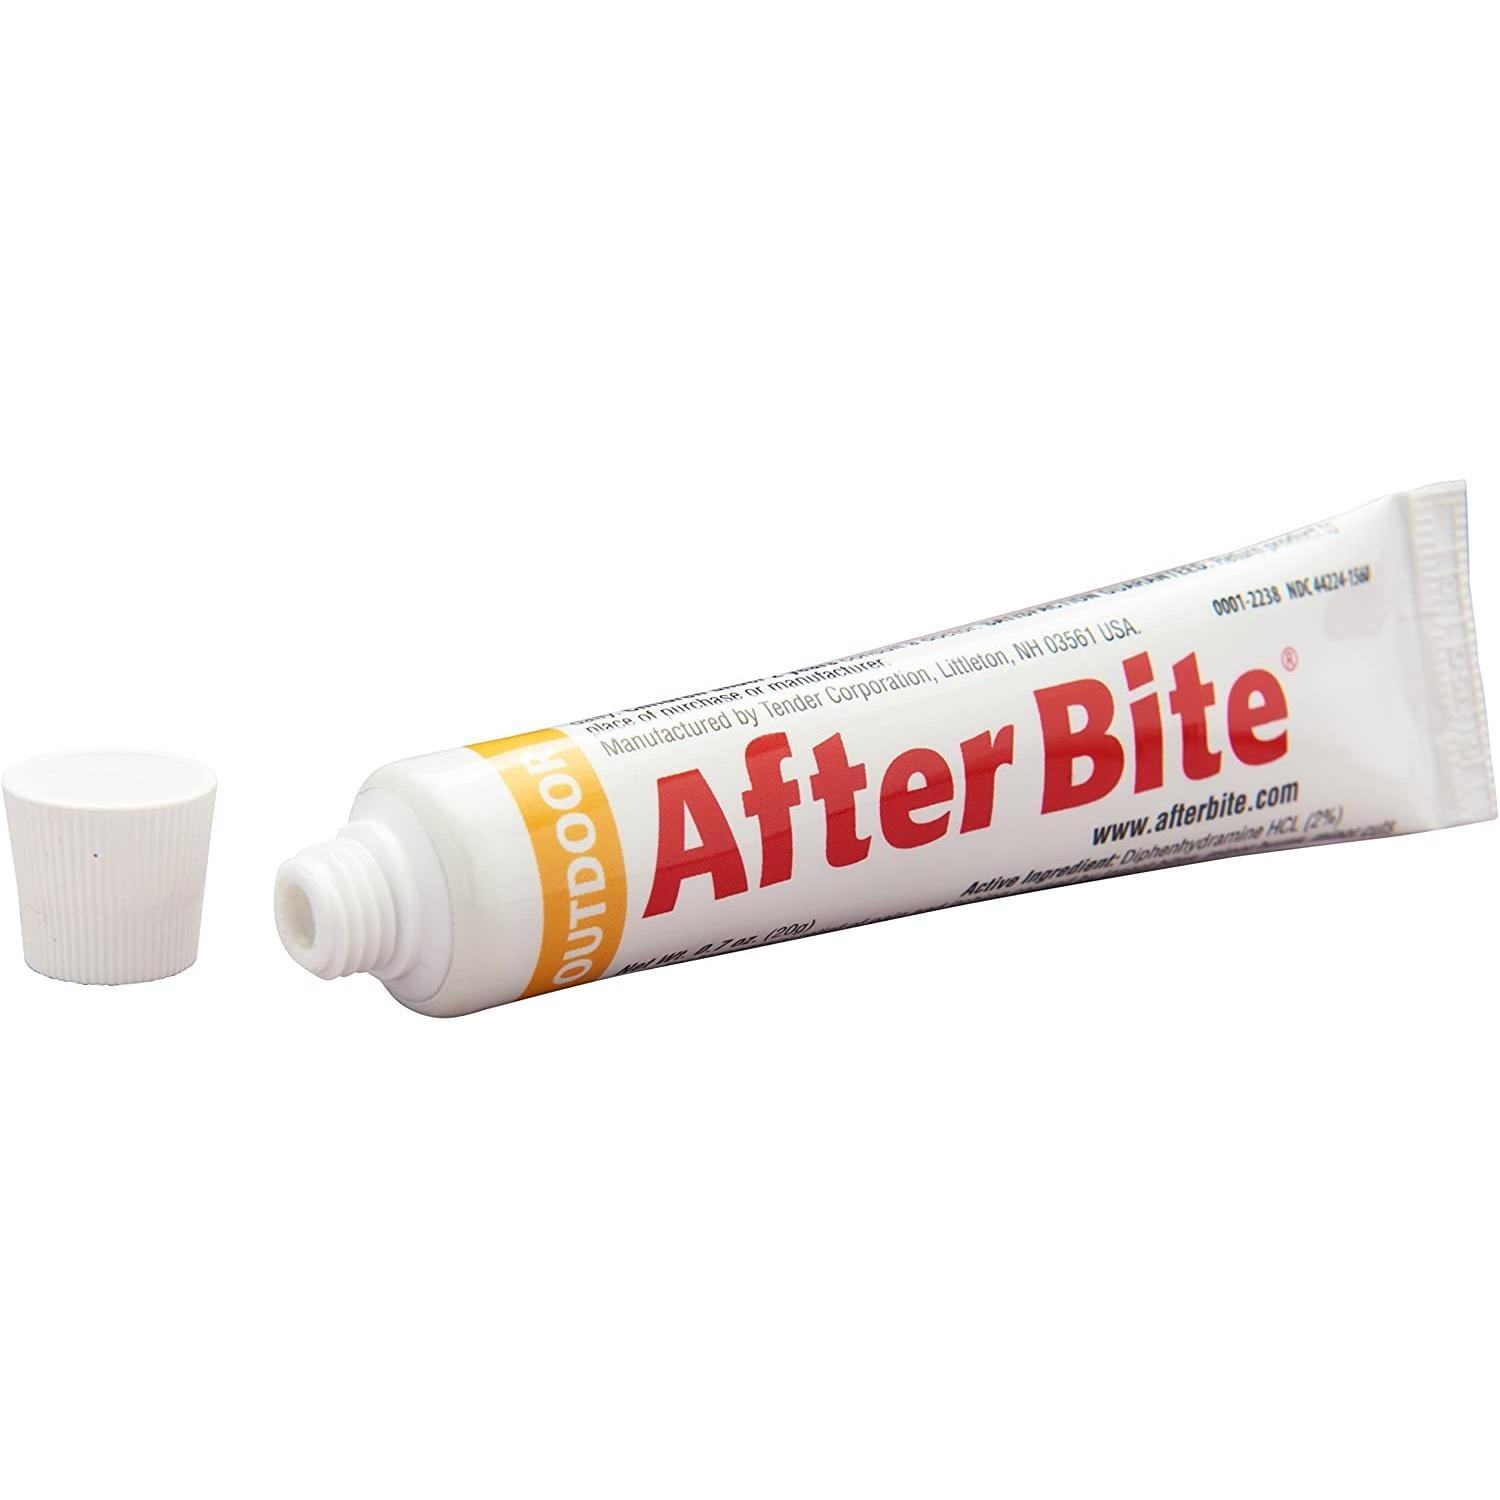 After Bite Outdoor Insect Bite & Sting Treatment, Skin Protectant, Portable Instant Relief, Stop Itching Fast, 0.7-Ounce